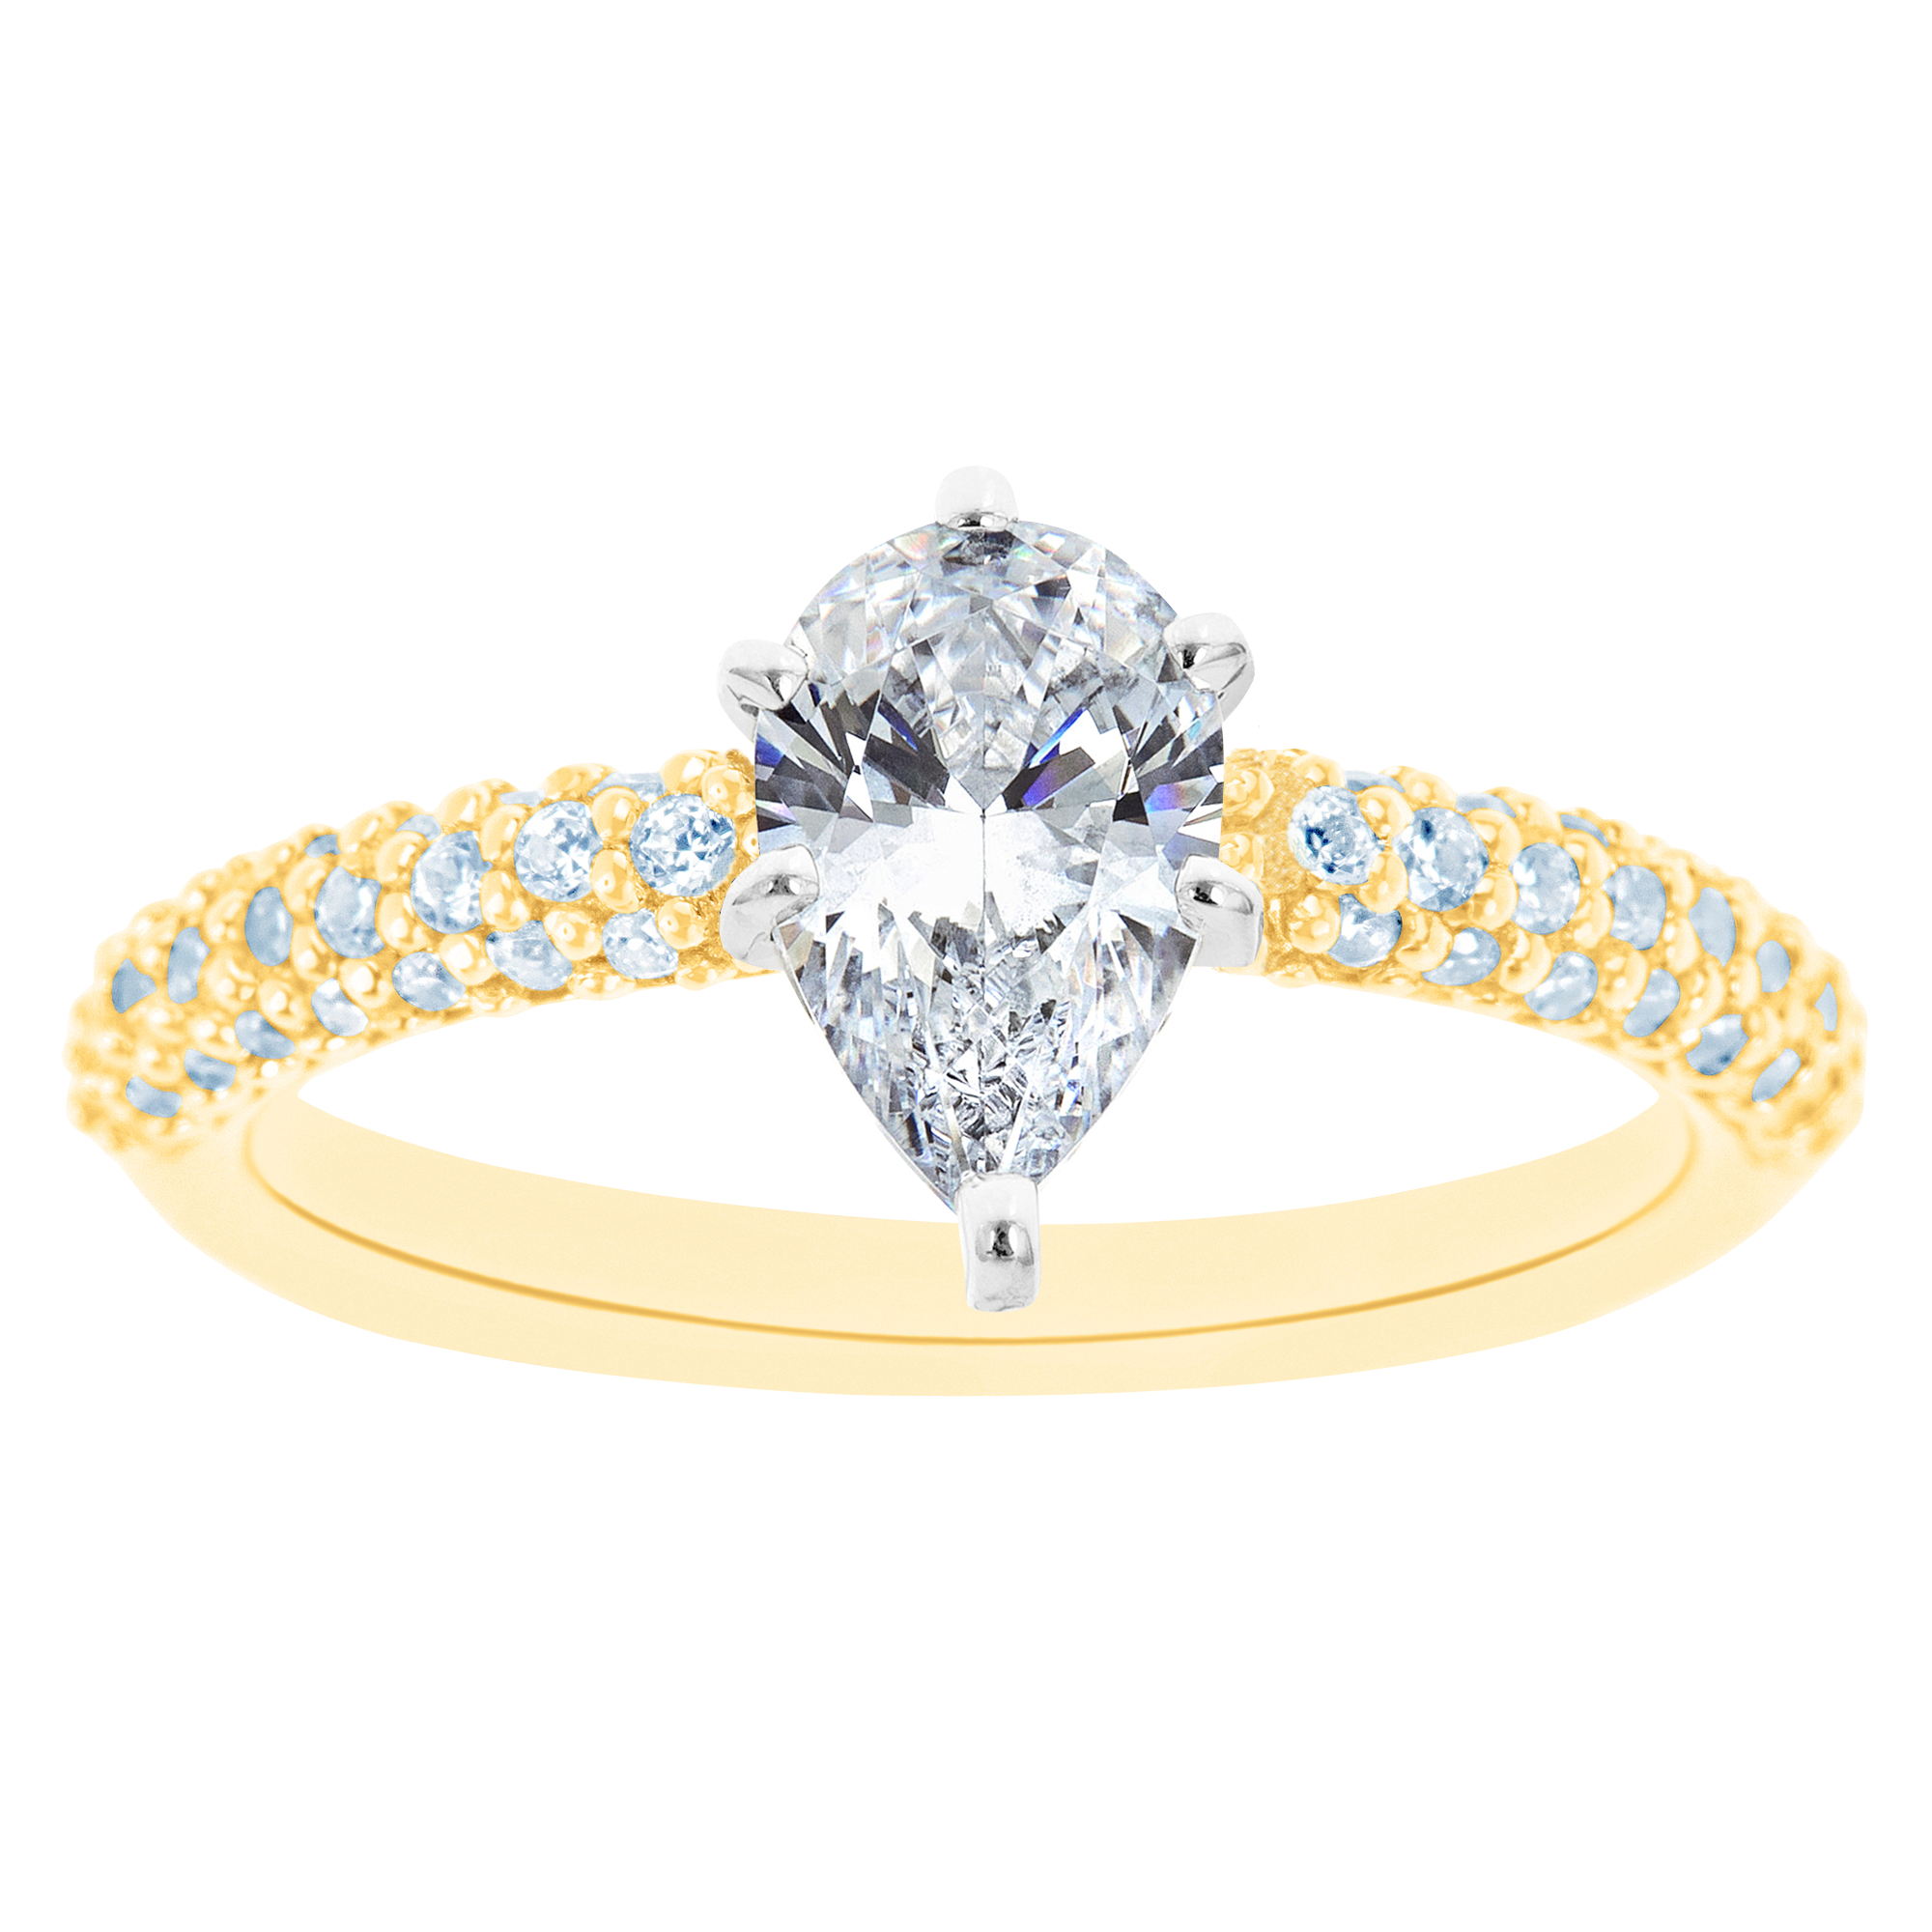 New York City Diamond District 14K Two Tone Pear Shaped Certified Diamond Engagement Ring